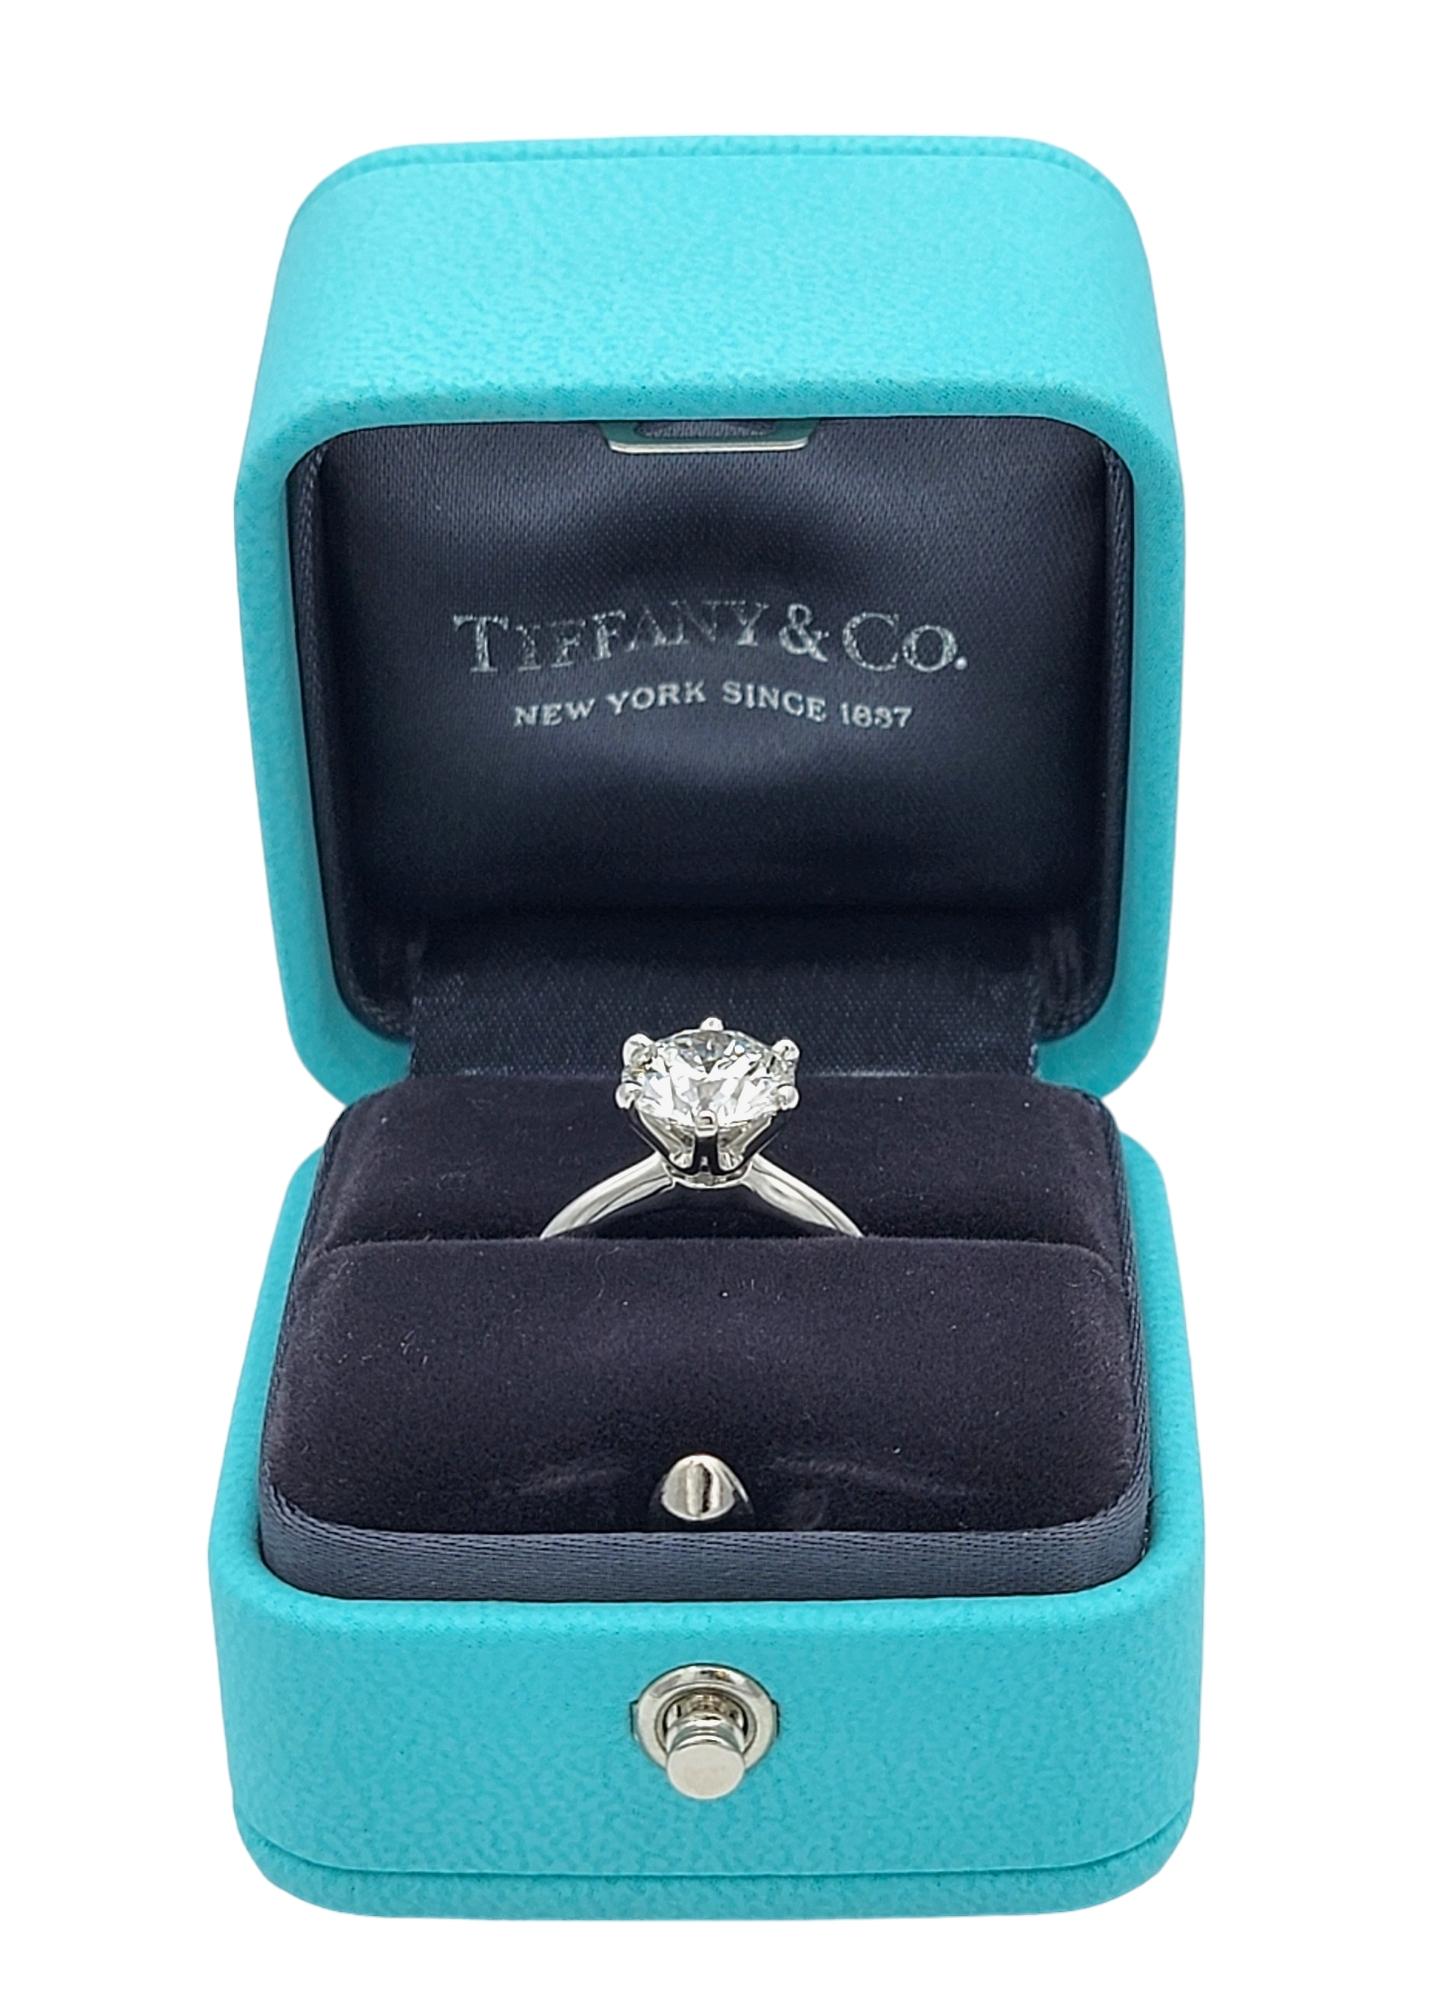 Tiffany & Co. 2.29 Carat Round Diamond Solitaire 6 Prong Engagement Ring, F/VS1  For Sale 5